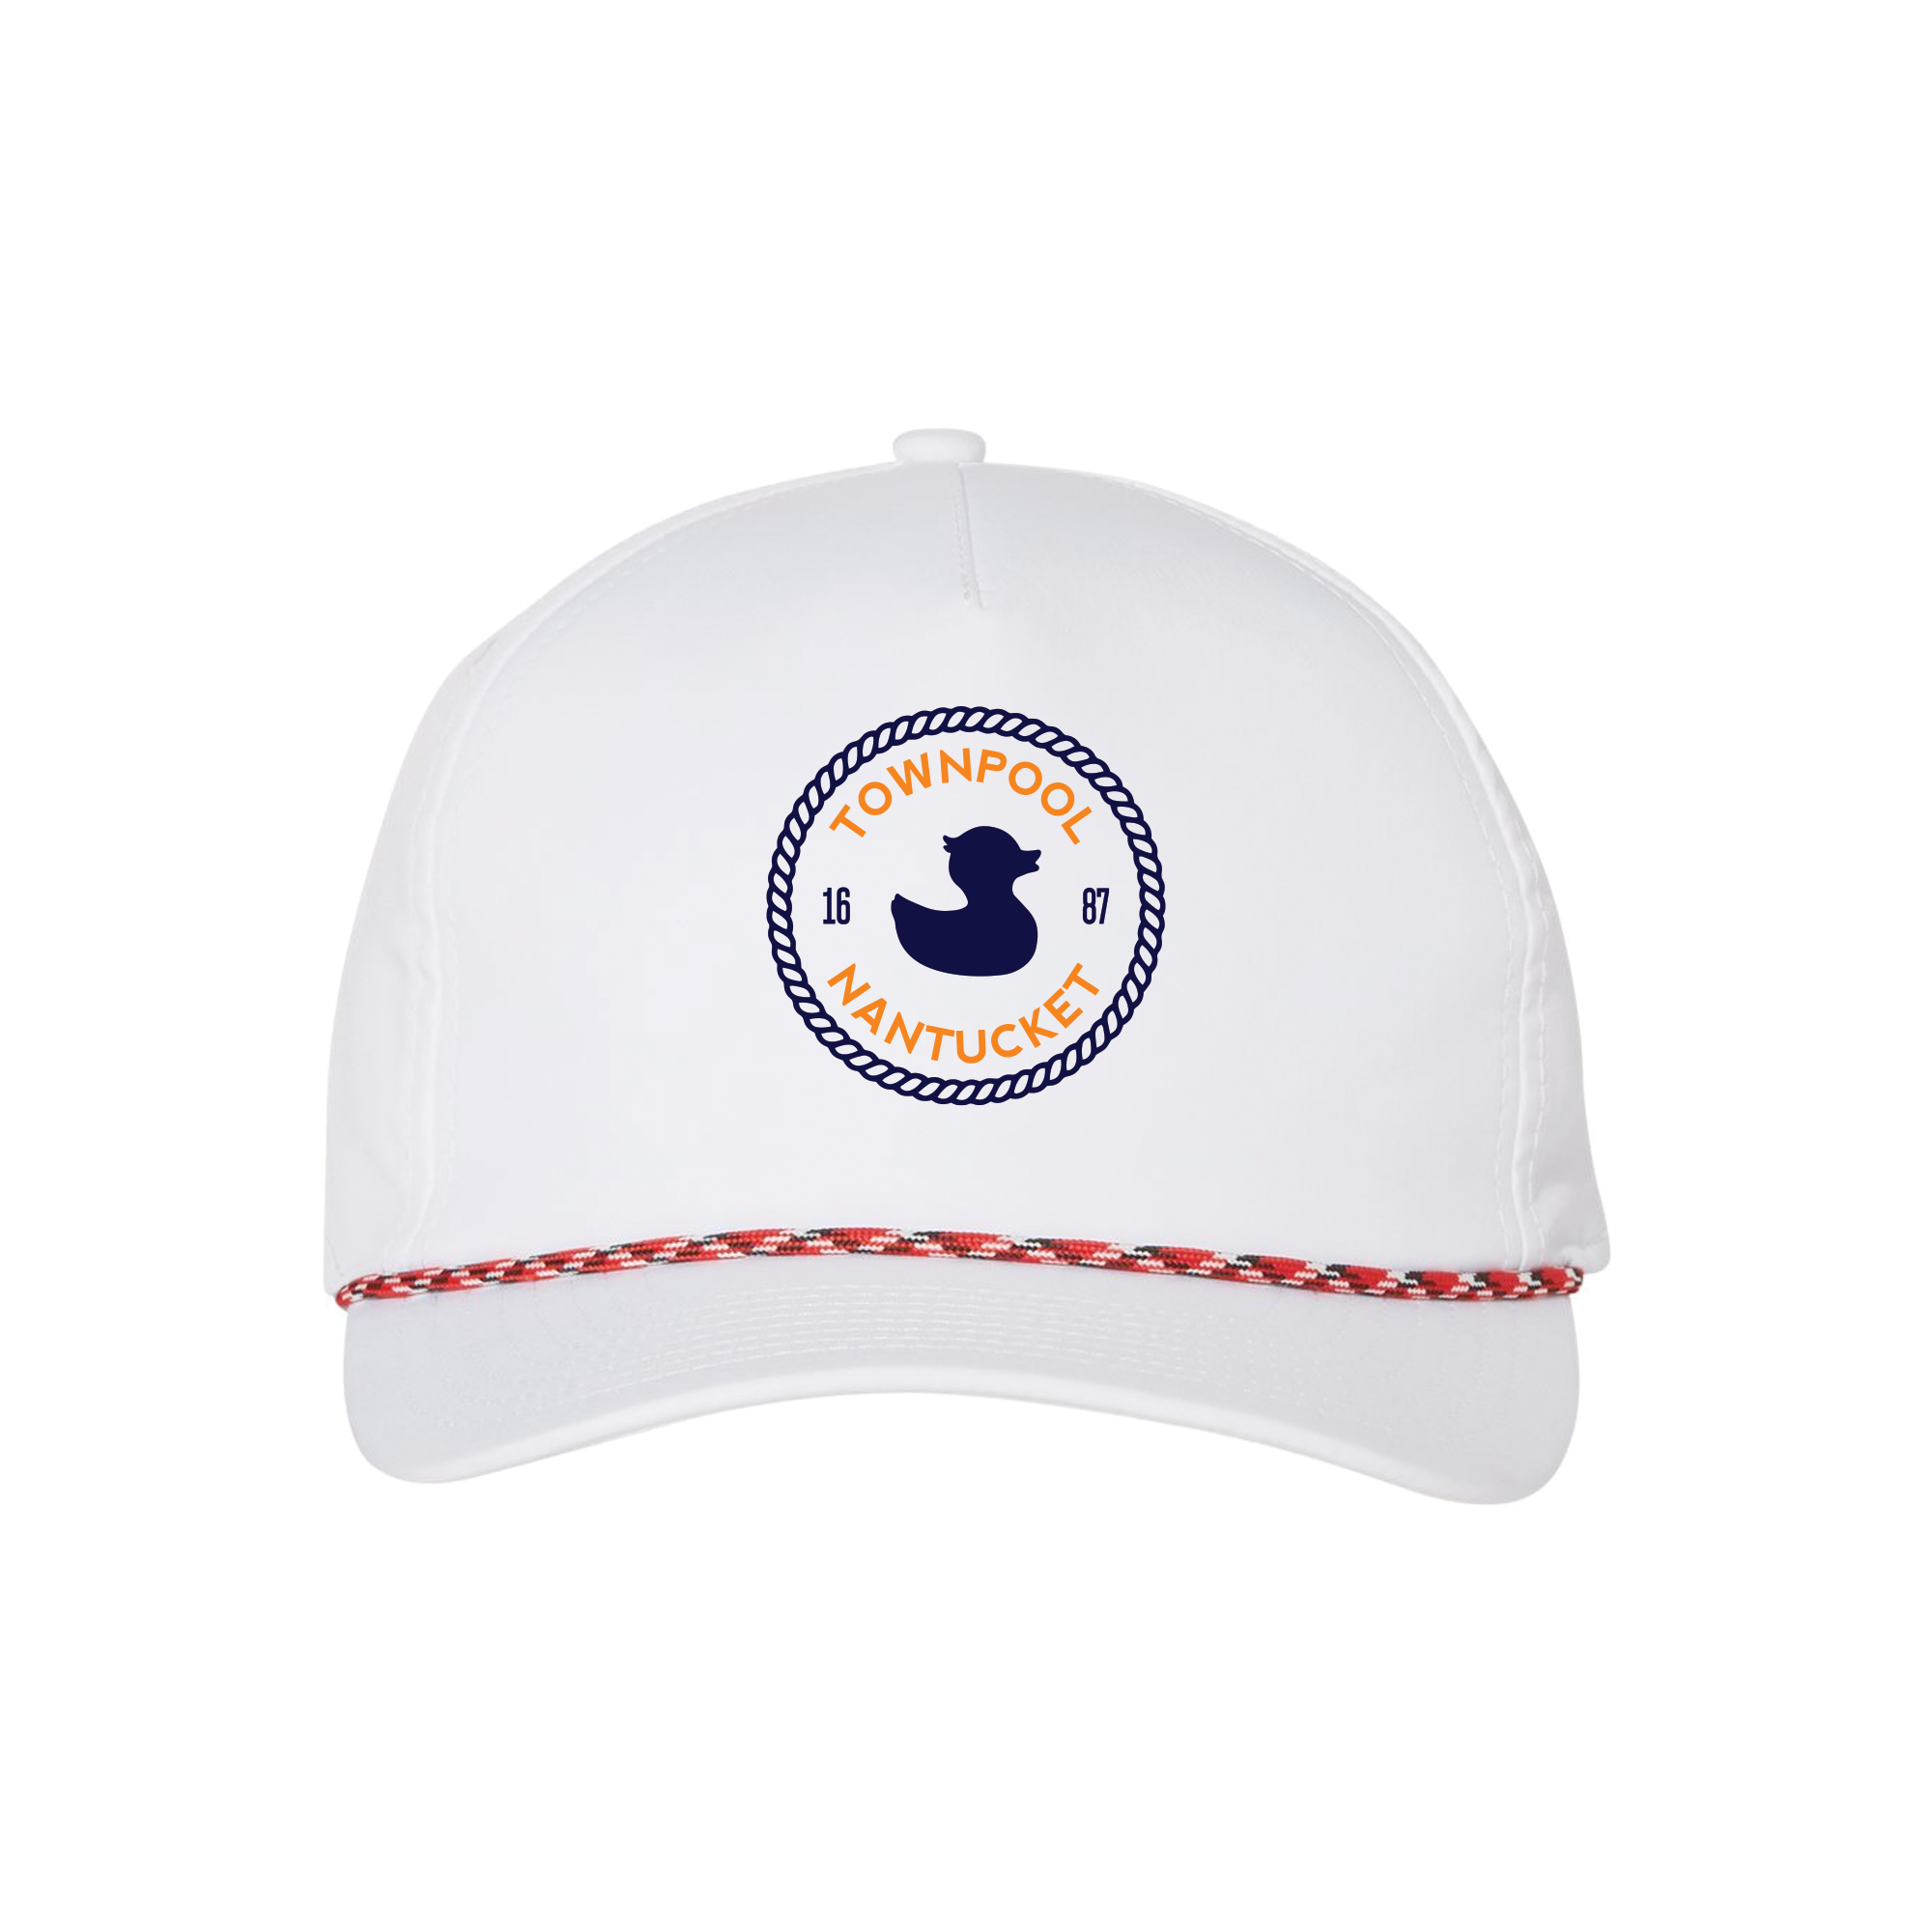 Signature TownPool Hat with Rope (White, Navy/Orange, Red/White/Black)